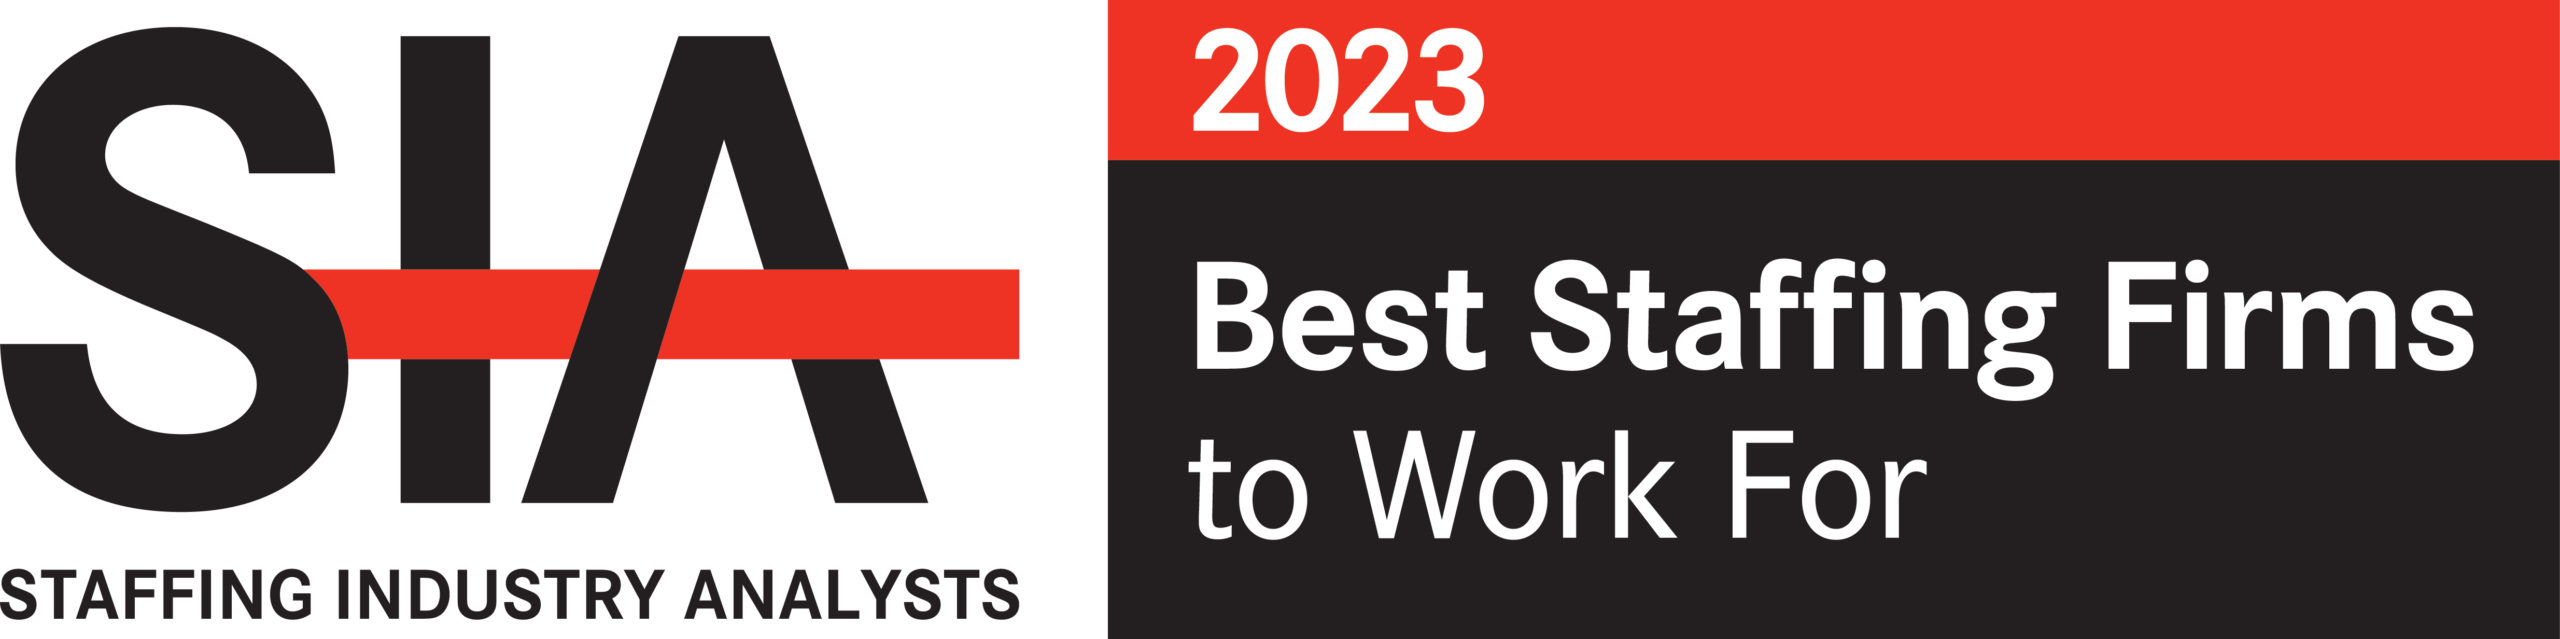 Partners Personnel recognized as an SIA’s 2023 Best Staffing Firms To Work For  for the second consecutive year